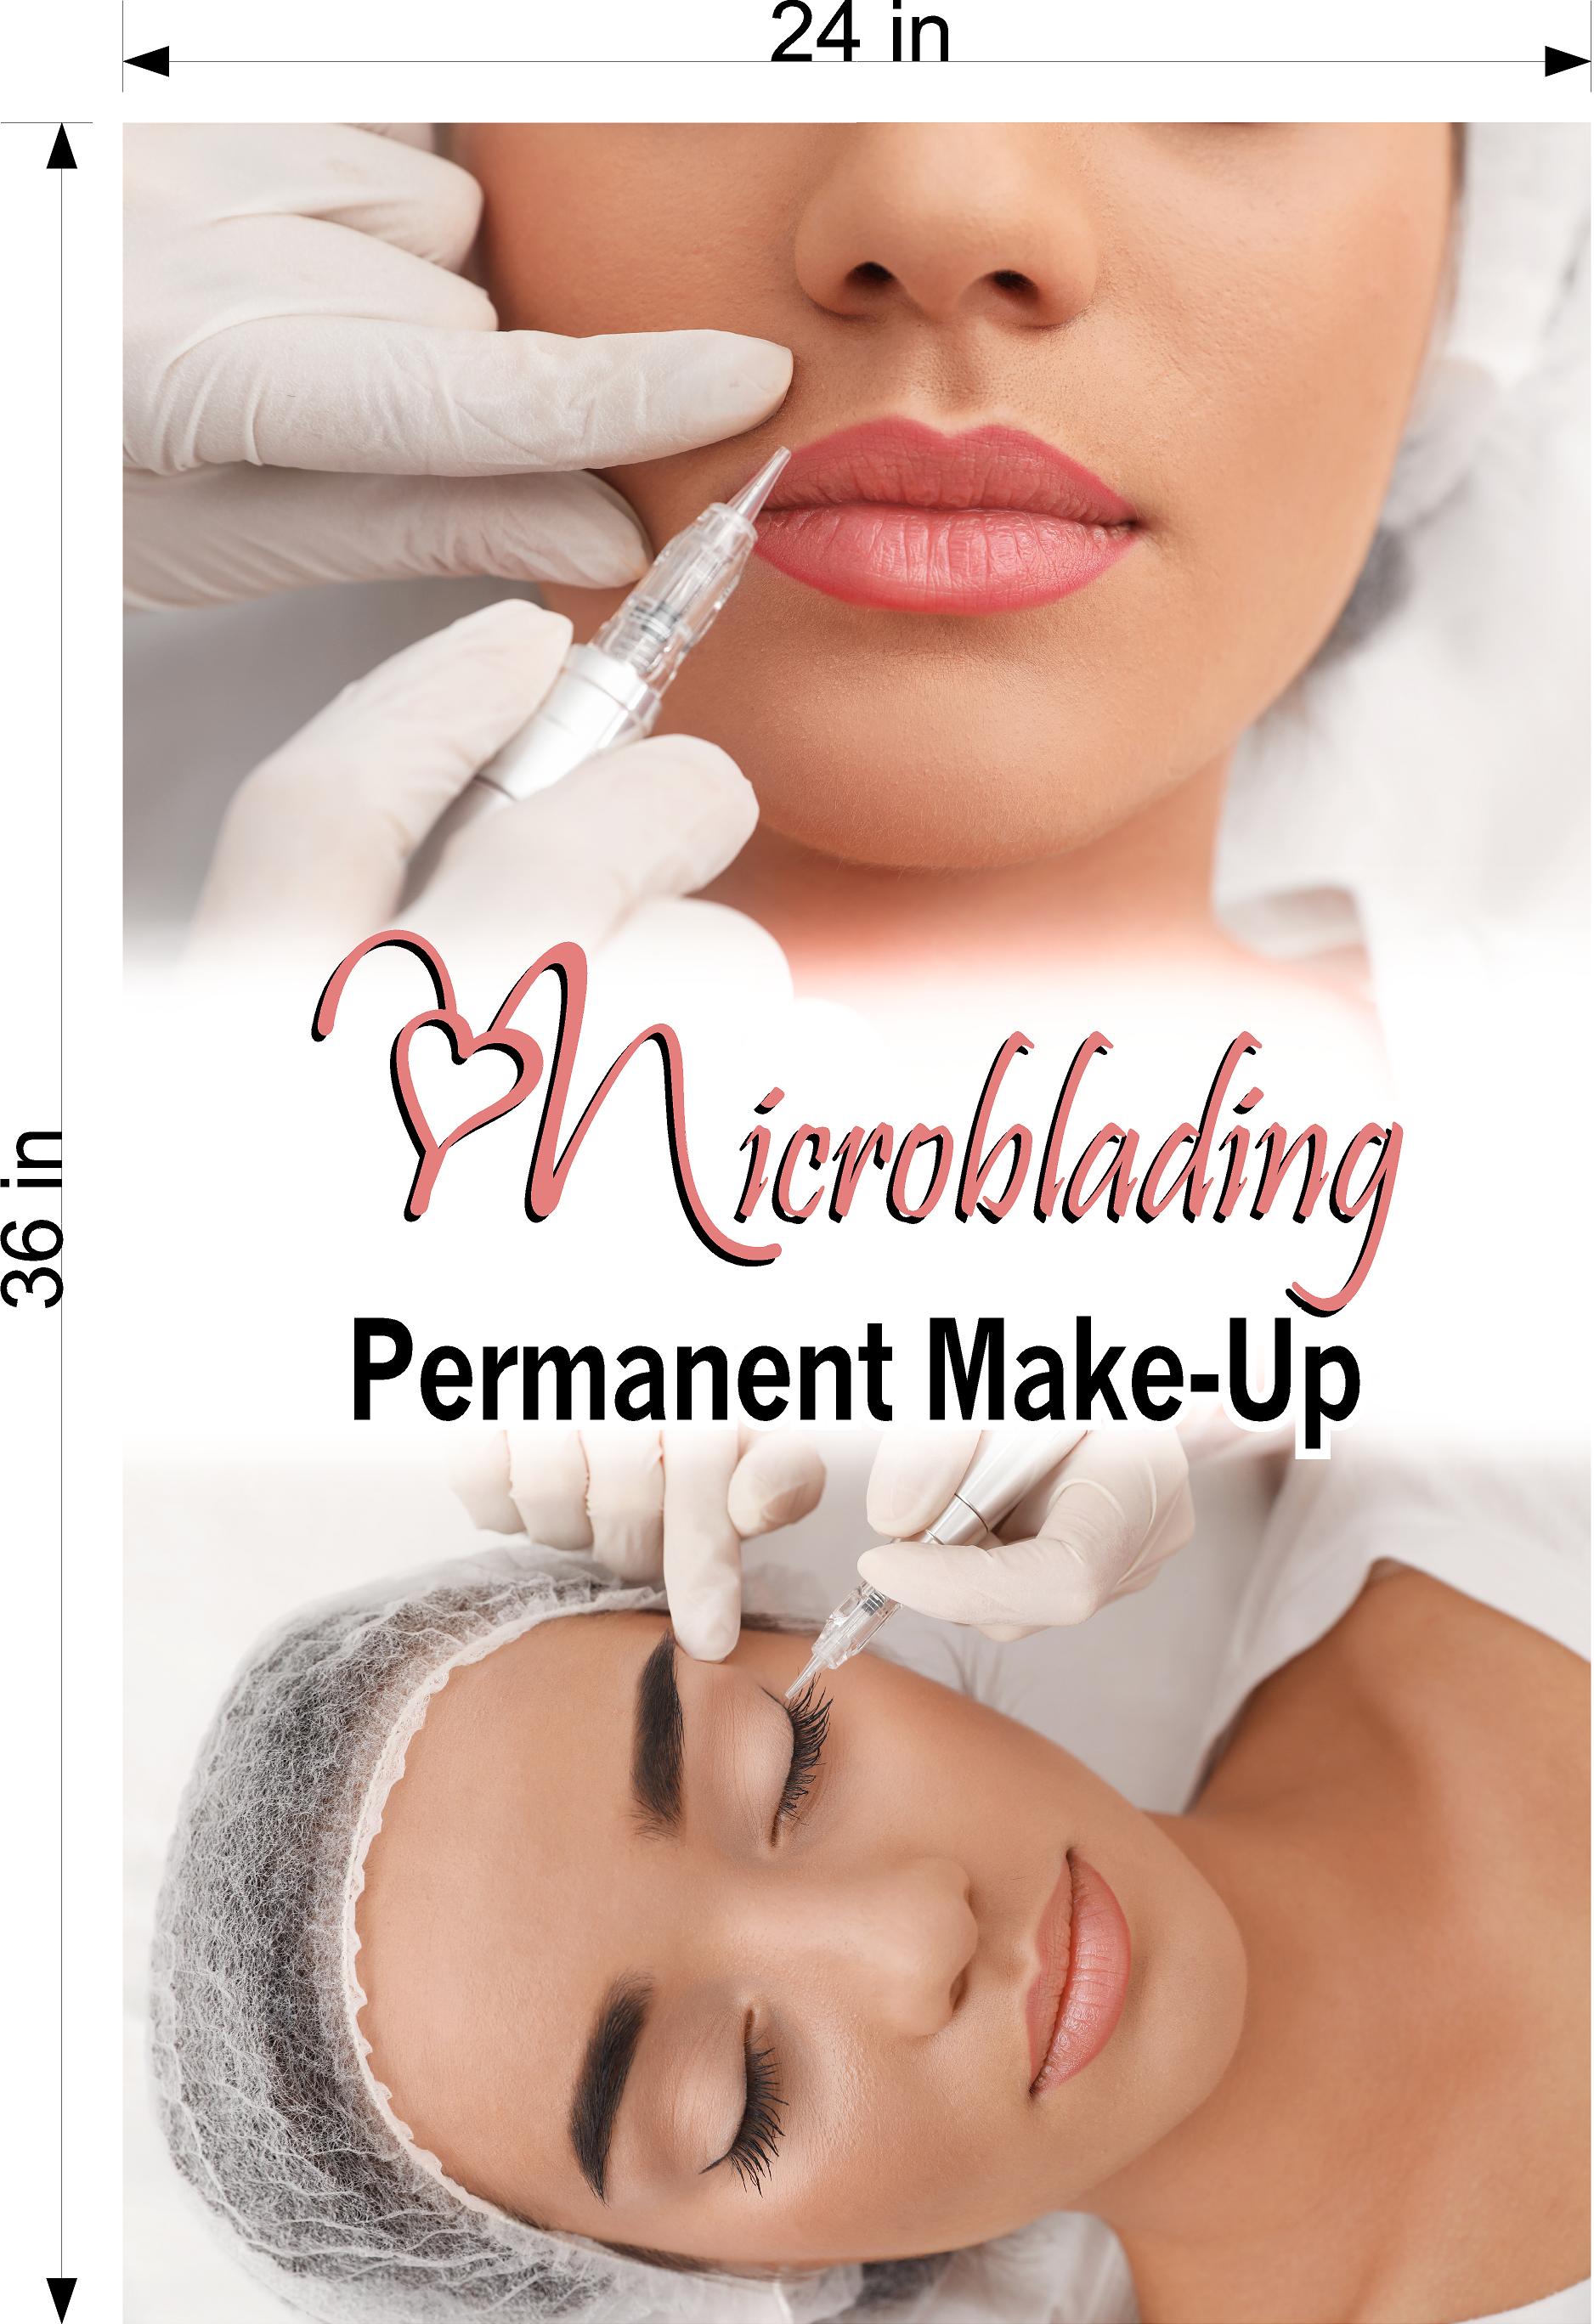 Microblading 15 Perforated Mesh One Way Vision See-Through Window Vinyl Salon Services Permanent Makeup Vertical